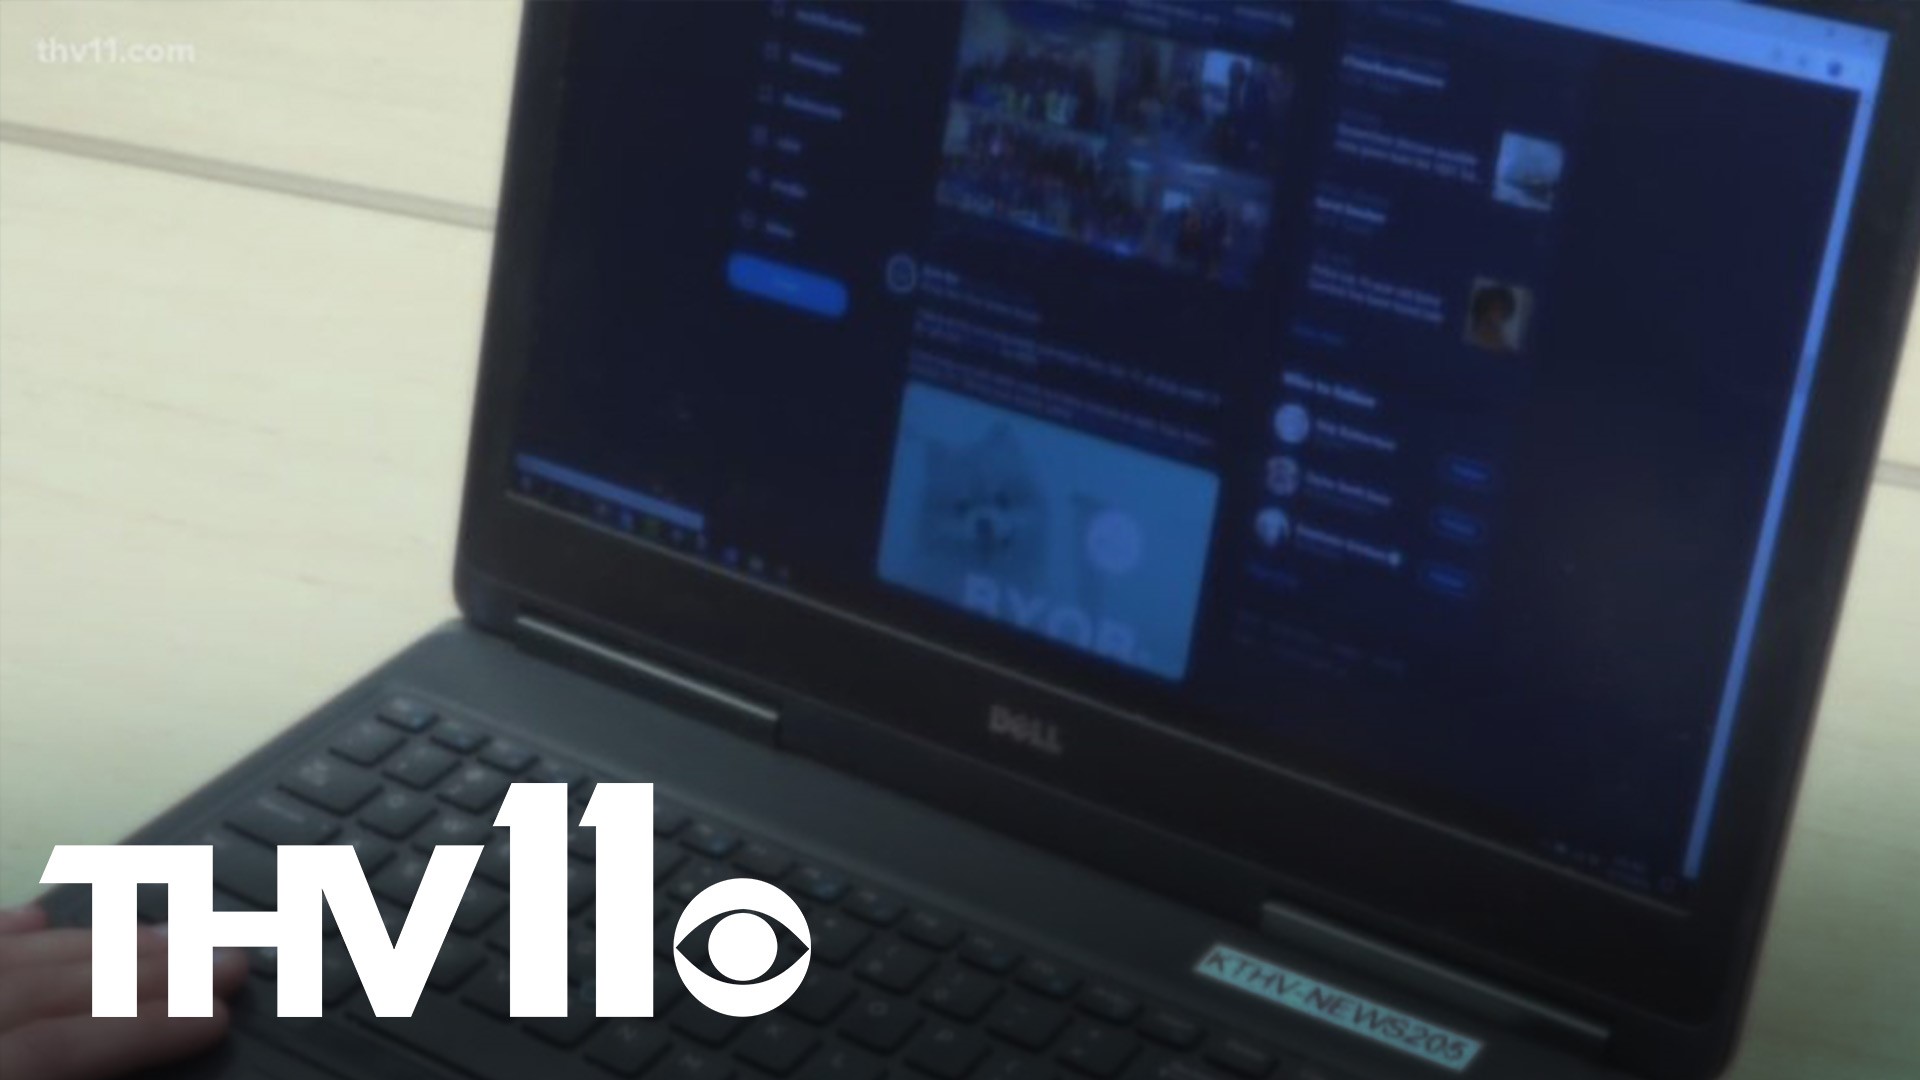 The Little Rock FBI is warning people to watch out for online scams this year as more look to online shopping amid the coronavirus pandemic.